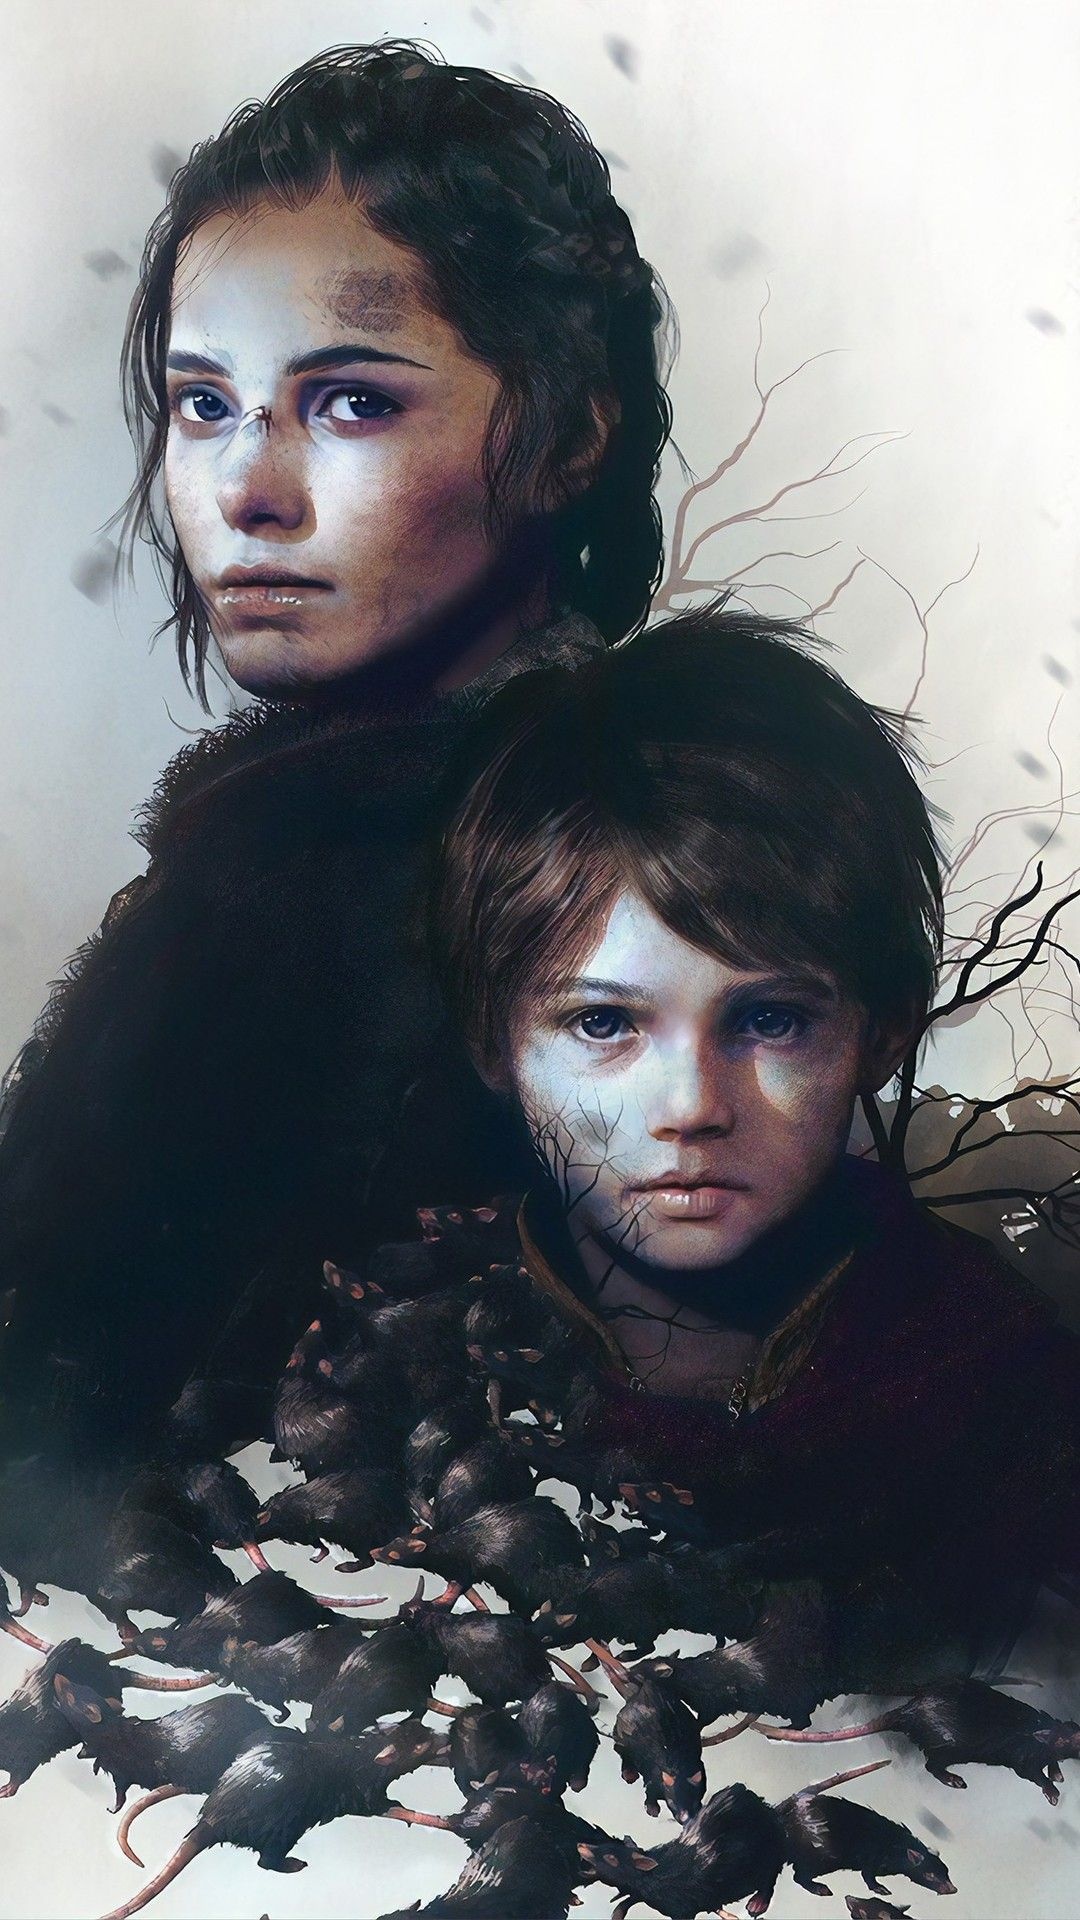 A Plague Tale: Requiem: Innocence, A narrative-driven game developed by Asobo Studio. 1080x1920 Full HD Wallpaper.